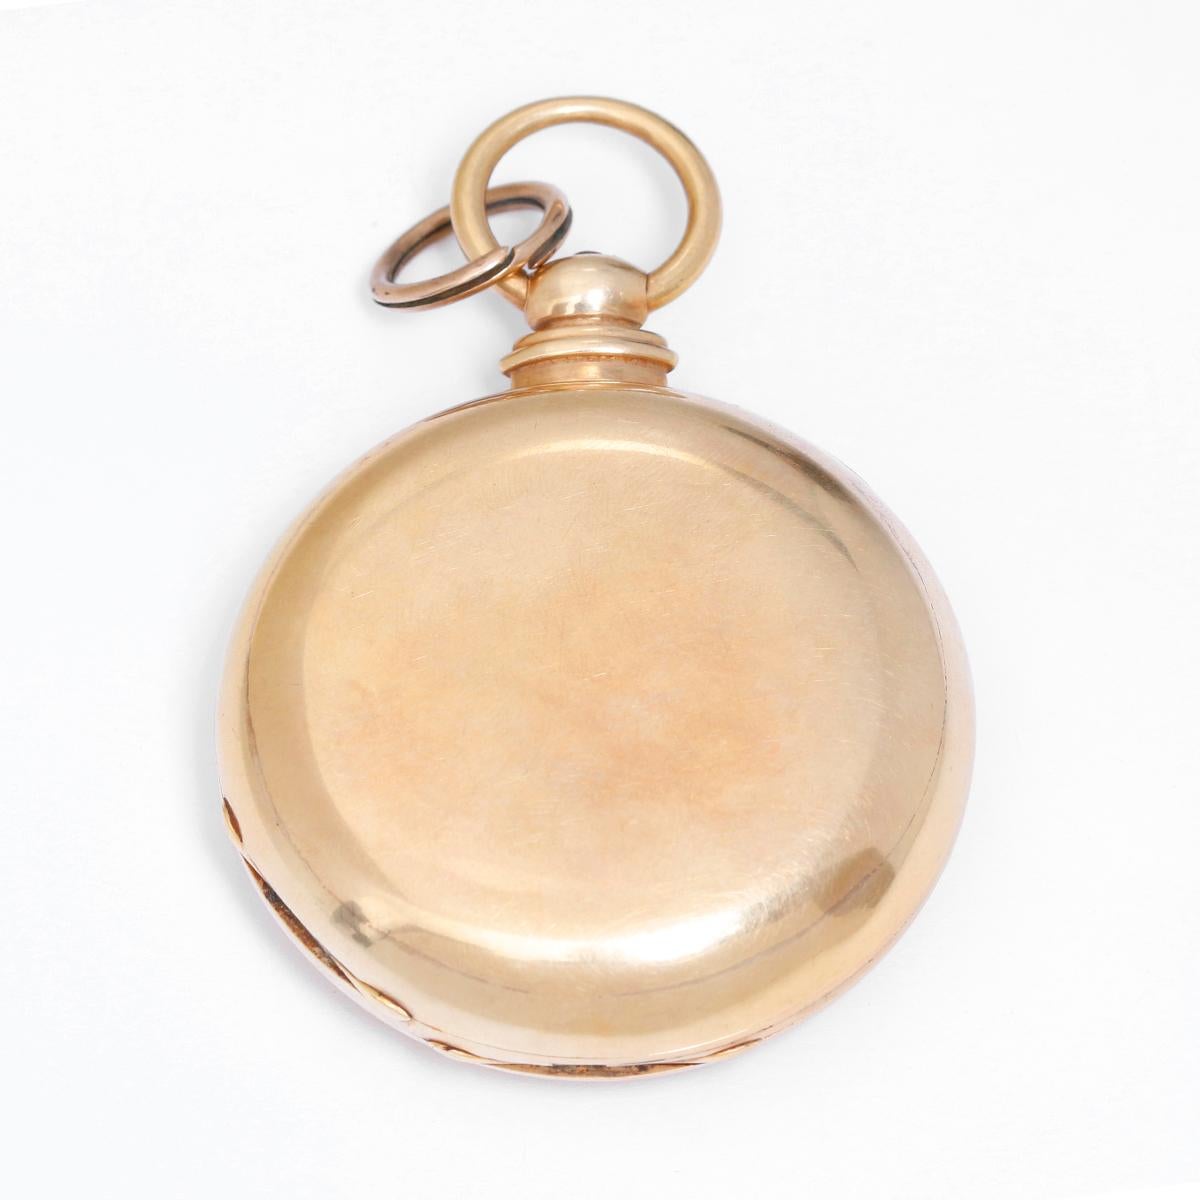 English 18 Karat Yellow Gold Pocket Watch In Excellent Condition For Sale In Dallas, TX